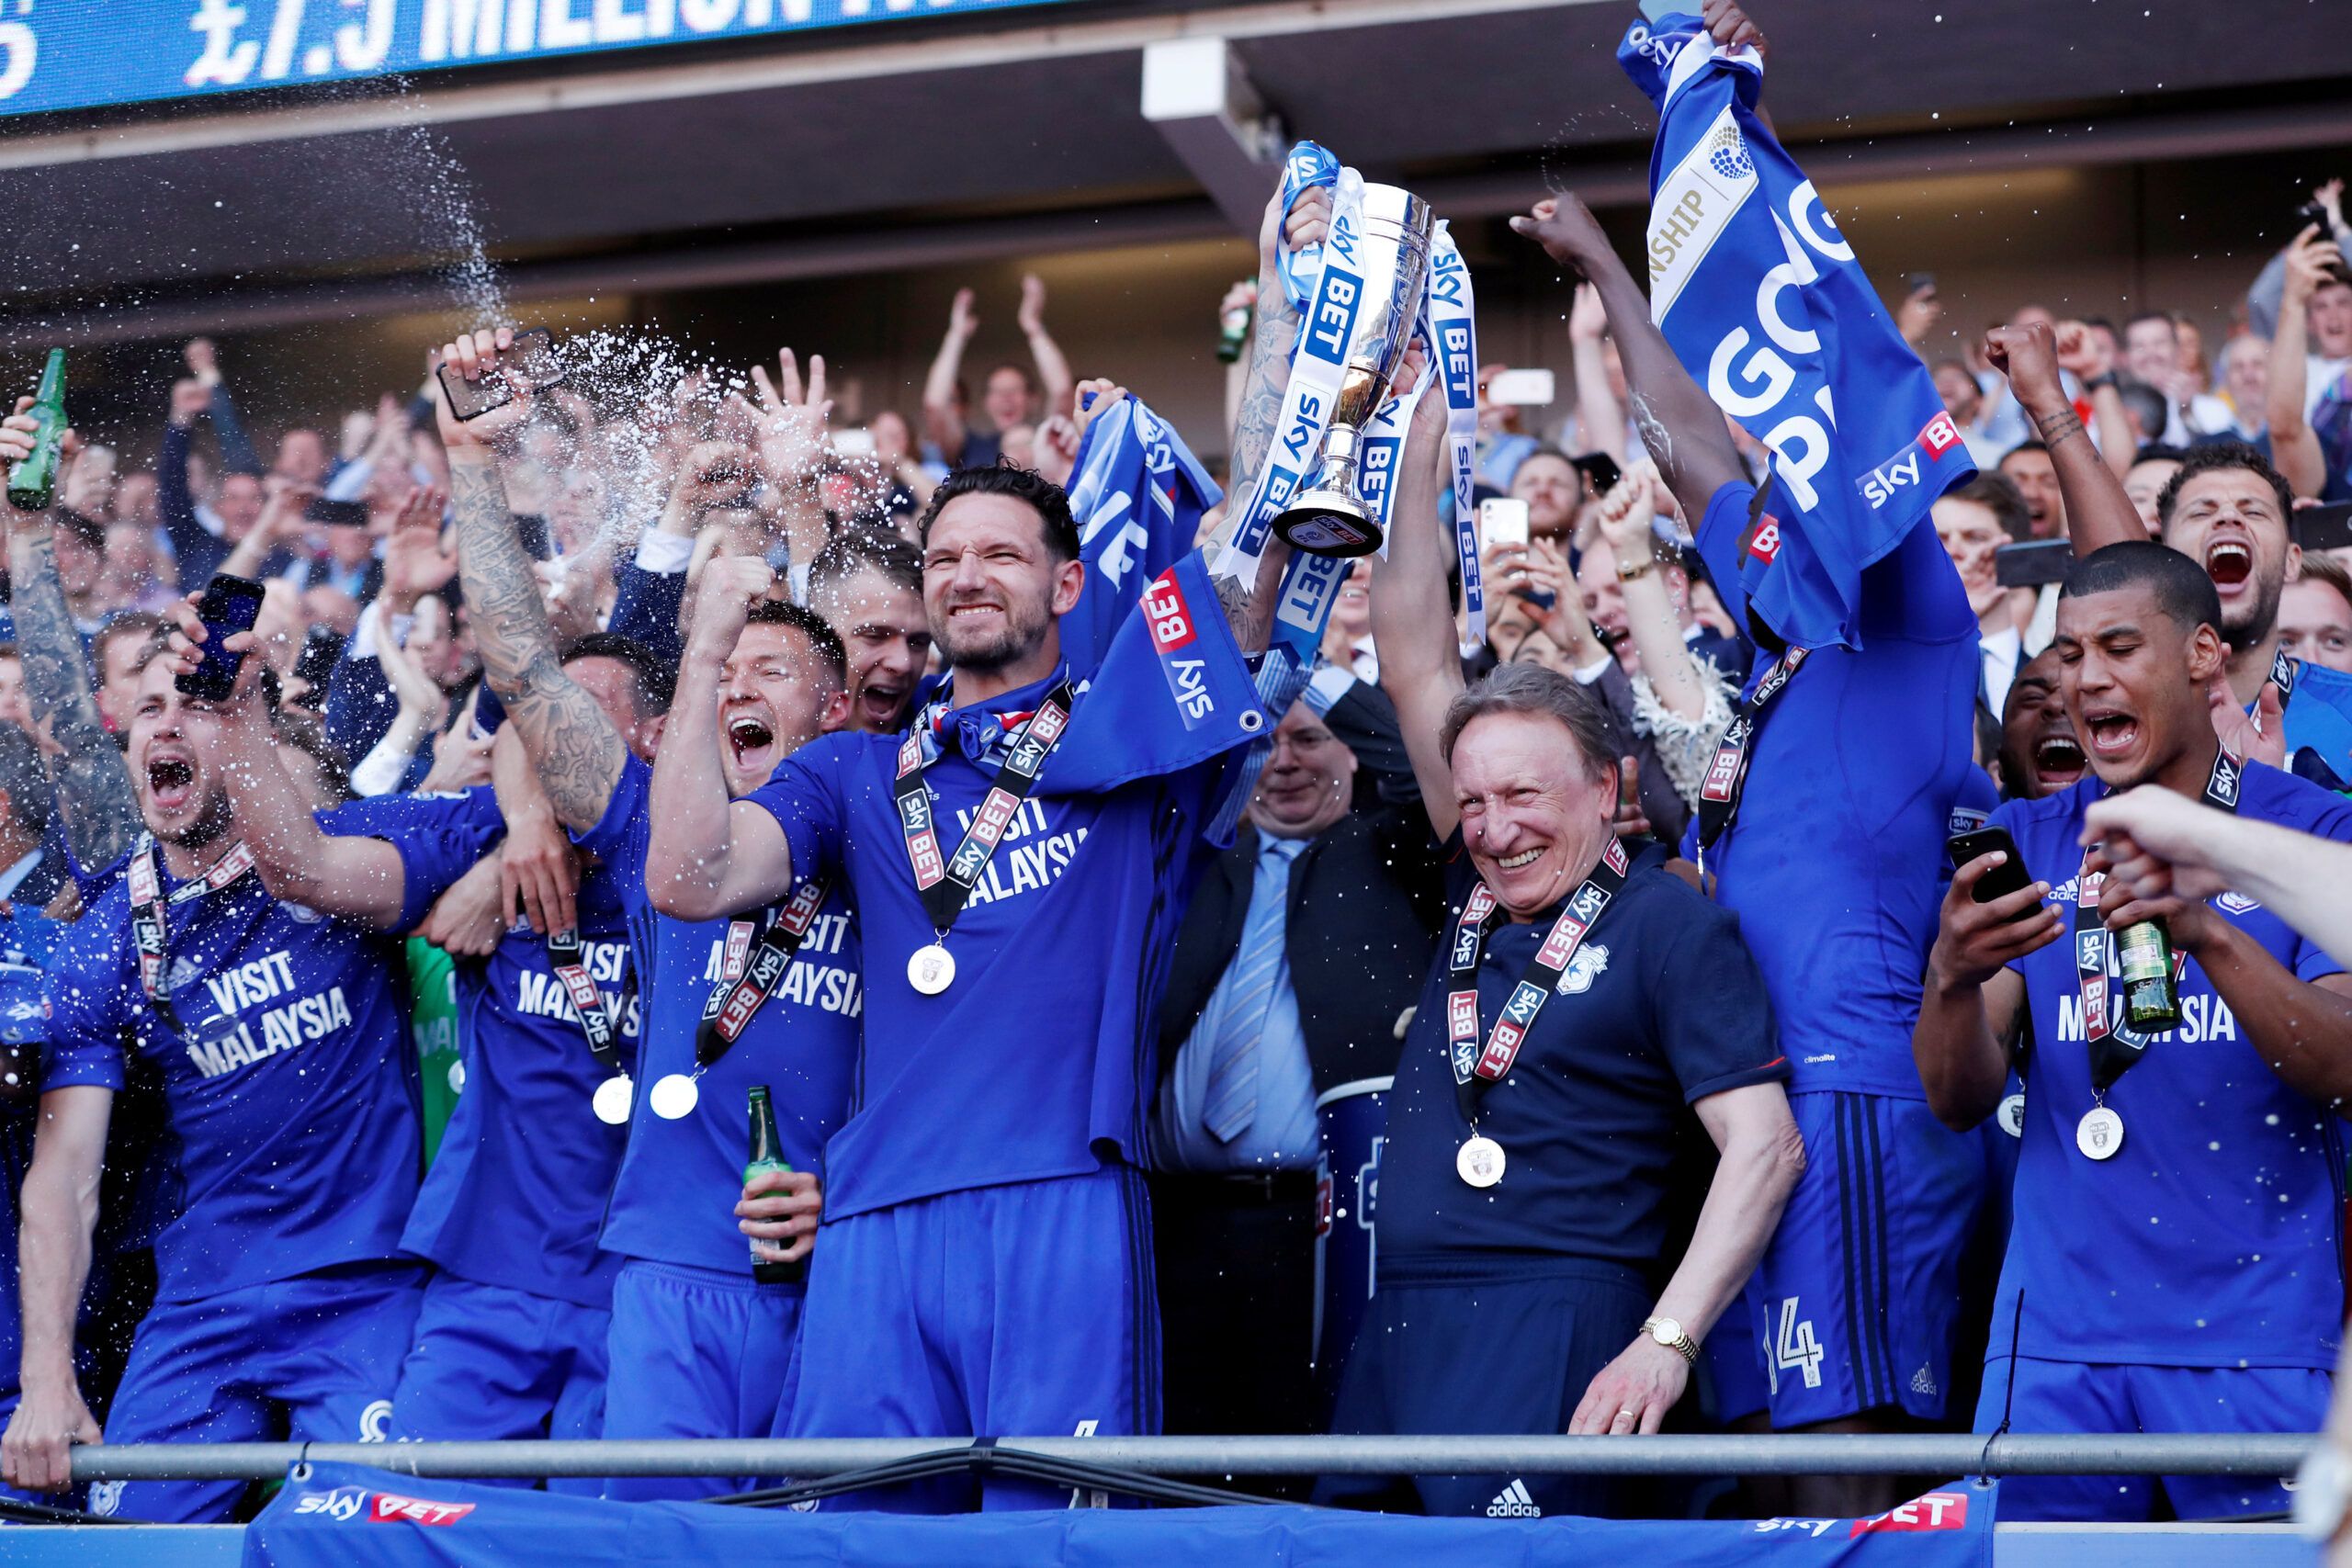 Soccer Football - Championship - Cardiff City vs Reading - Cardiff City Stadium, Cardiff, Britain - May 6, 2018   Cardiff City manager Neil Warnock, Gary Madine and team mates lift the trophy as they celebrate promotion to the premier league   Action Images via Reuters/Andrew Boyers    EDITORIAL USE ONLY. No use with unauthorized audio, video, data, fixture lists, club/league logos or 